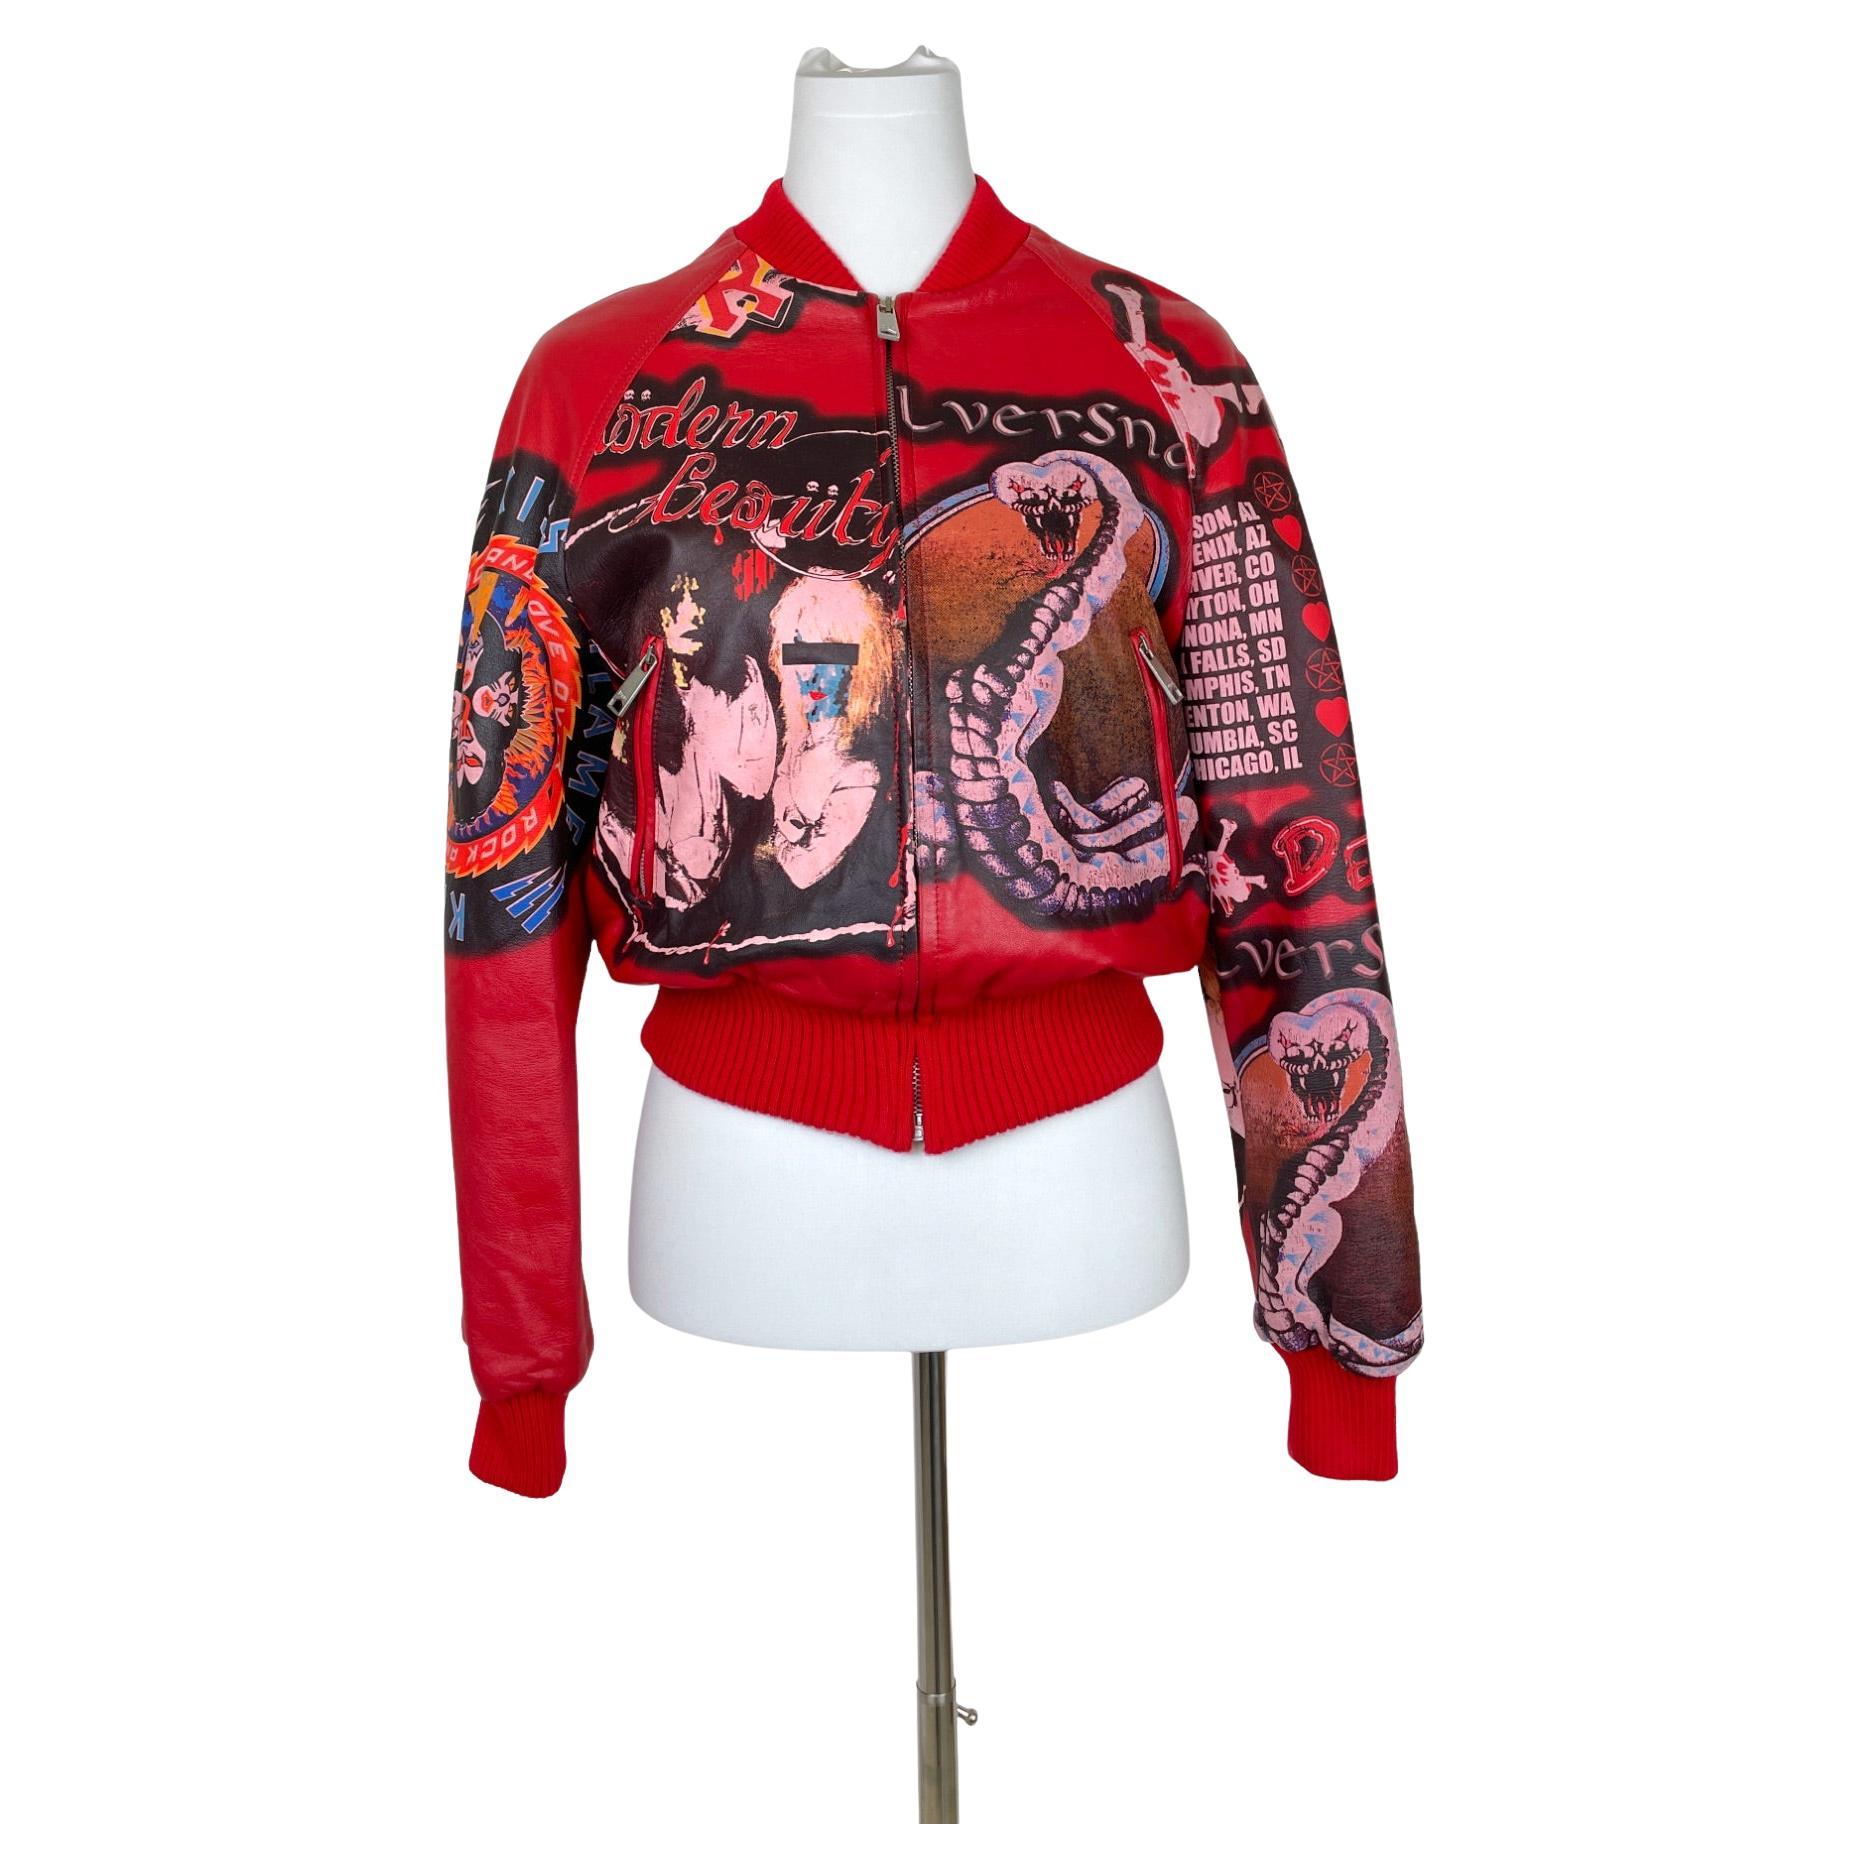 Rare Iconic D&G - Dolce e Gabbana Leather printed jacket with strass F/W 2001